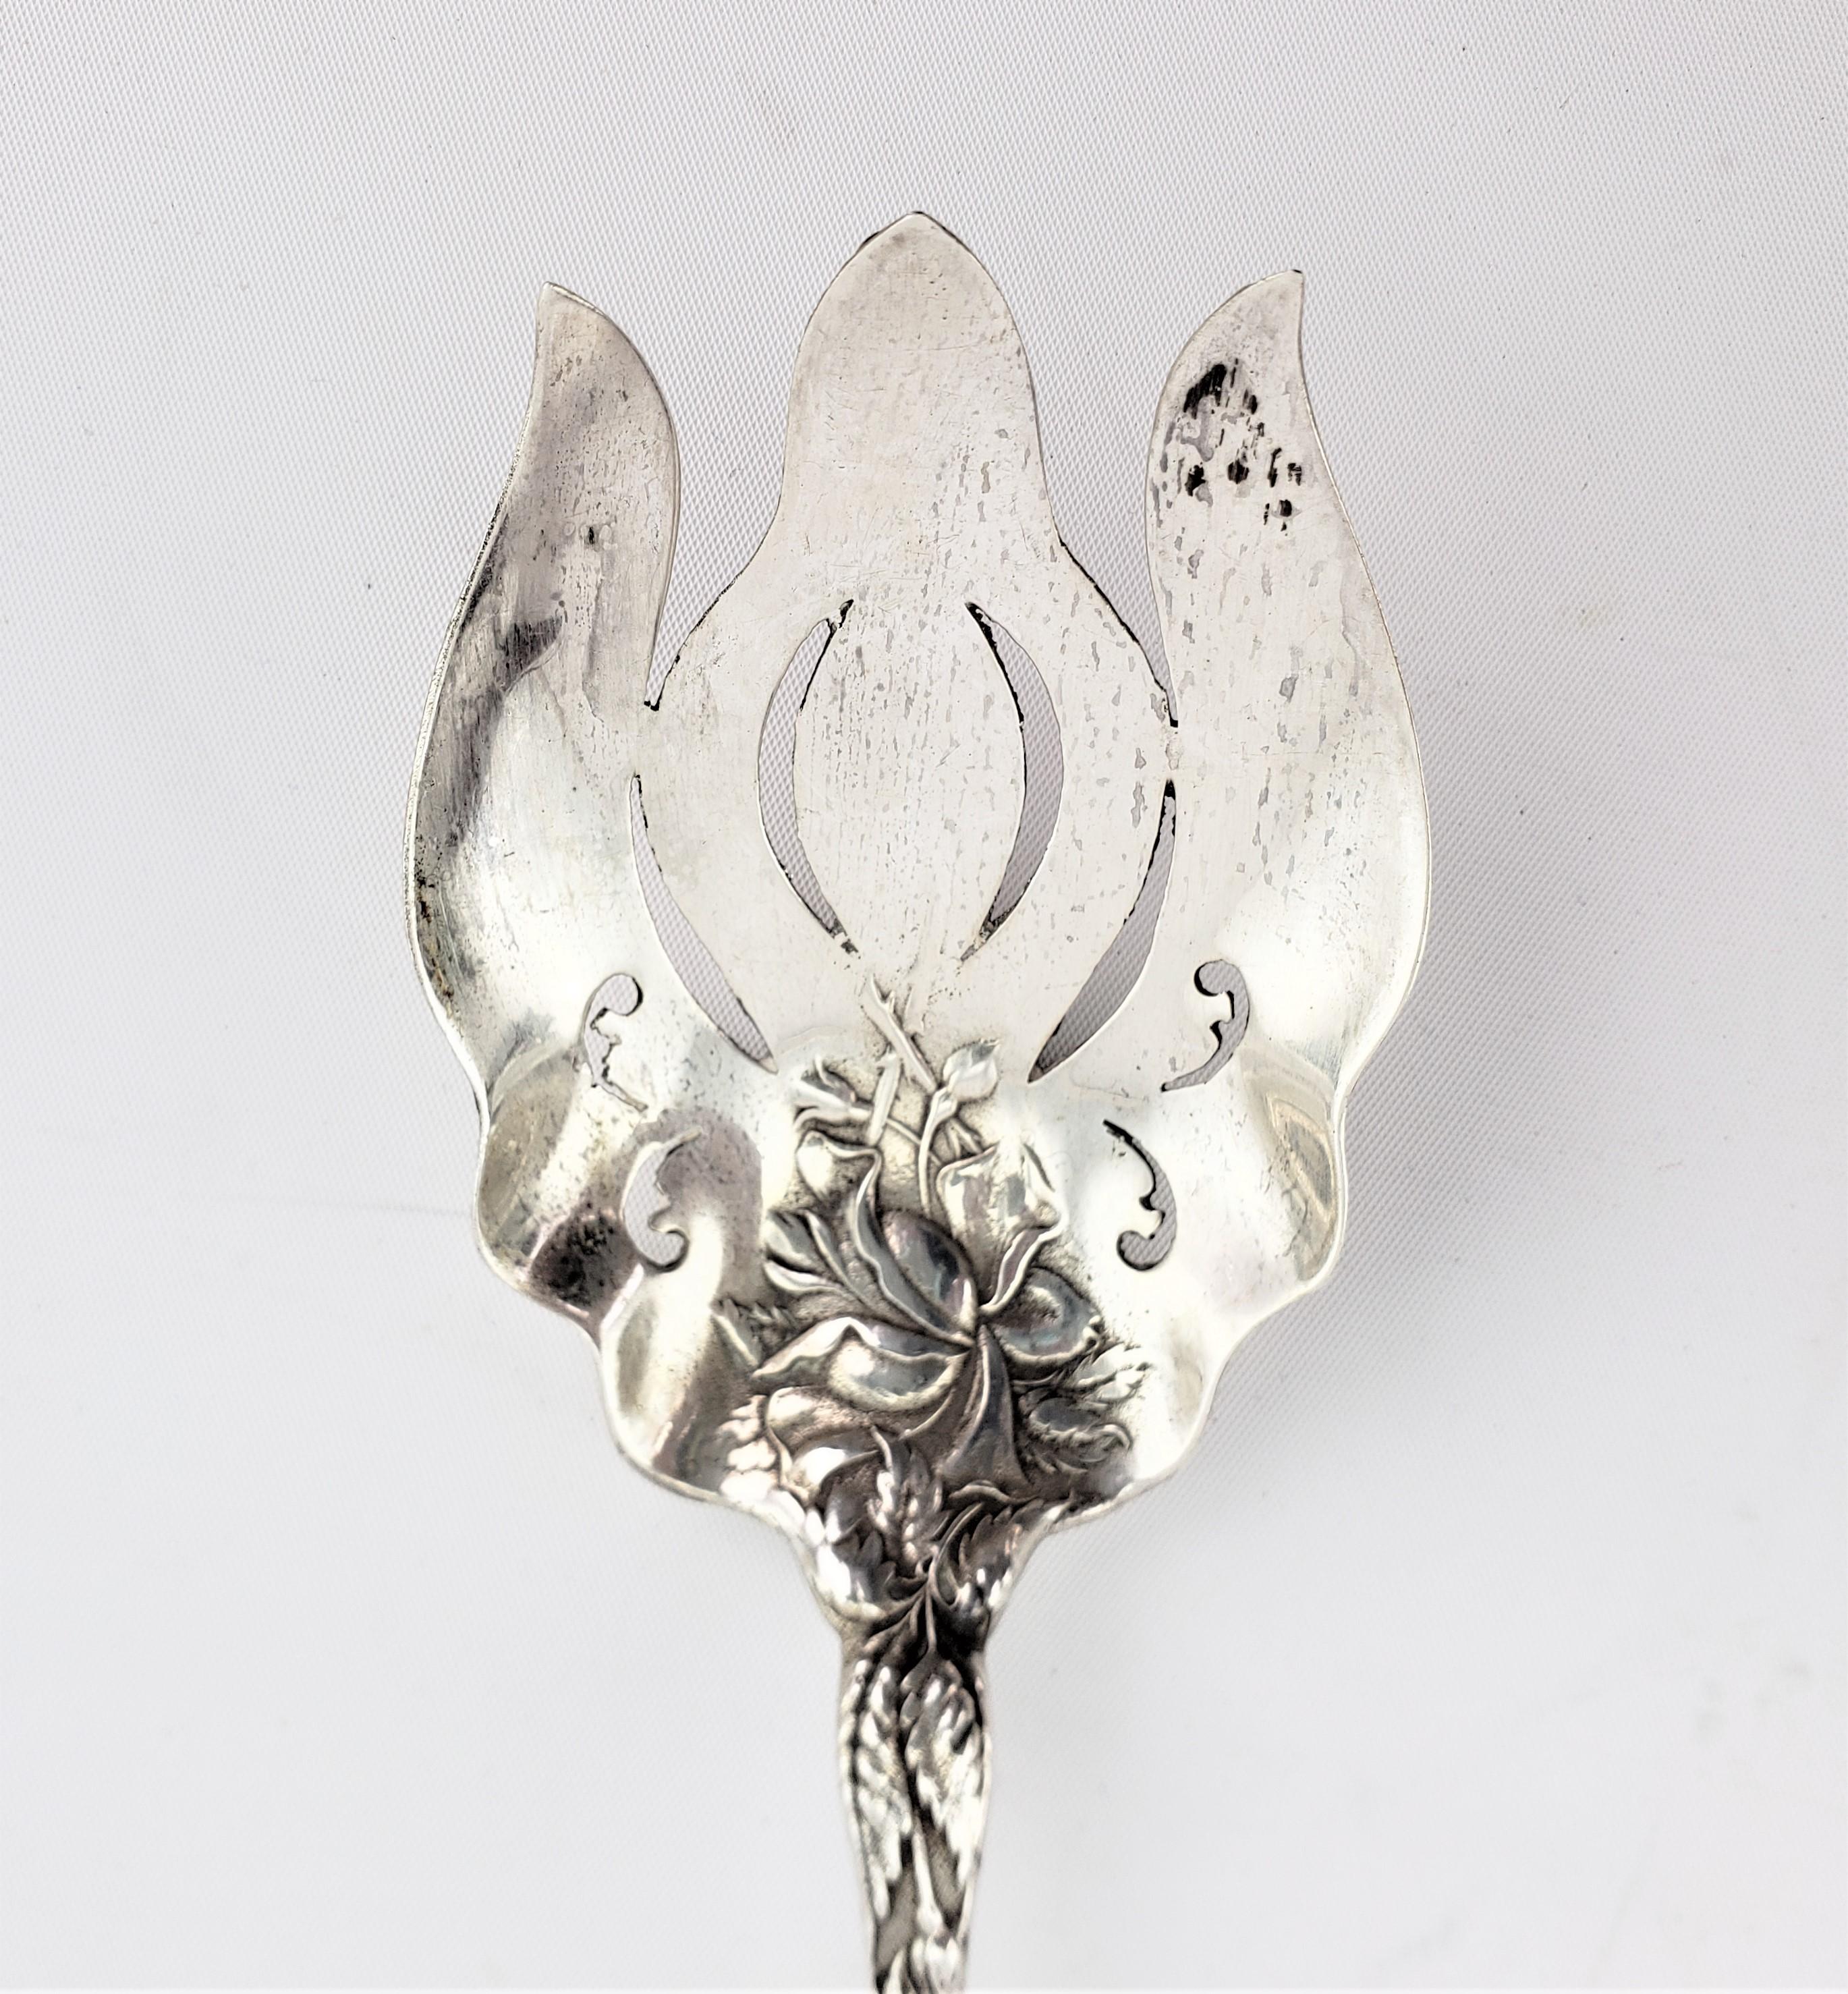 Antique American Art Nouveau Sterling Silver Serving Spoon Set with Floral Motif In Good Condition For Sale In Hamilton, Ontario